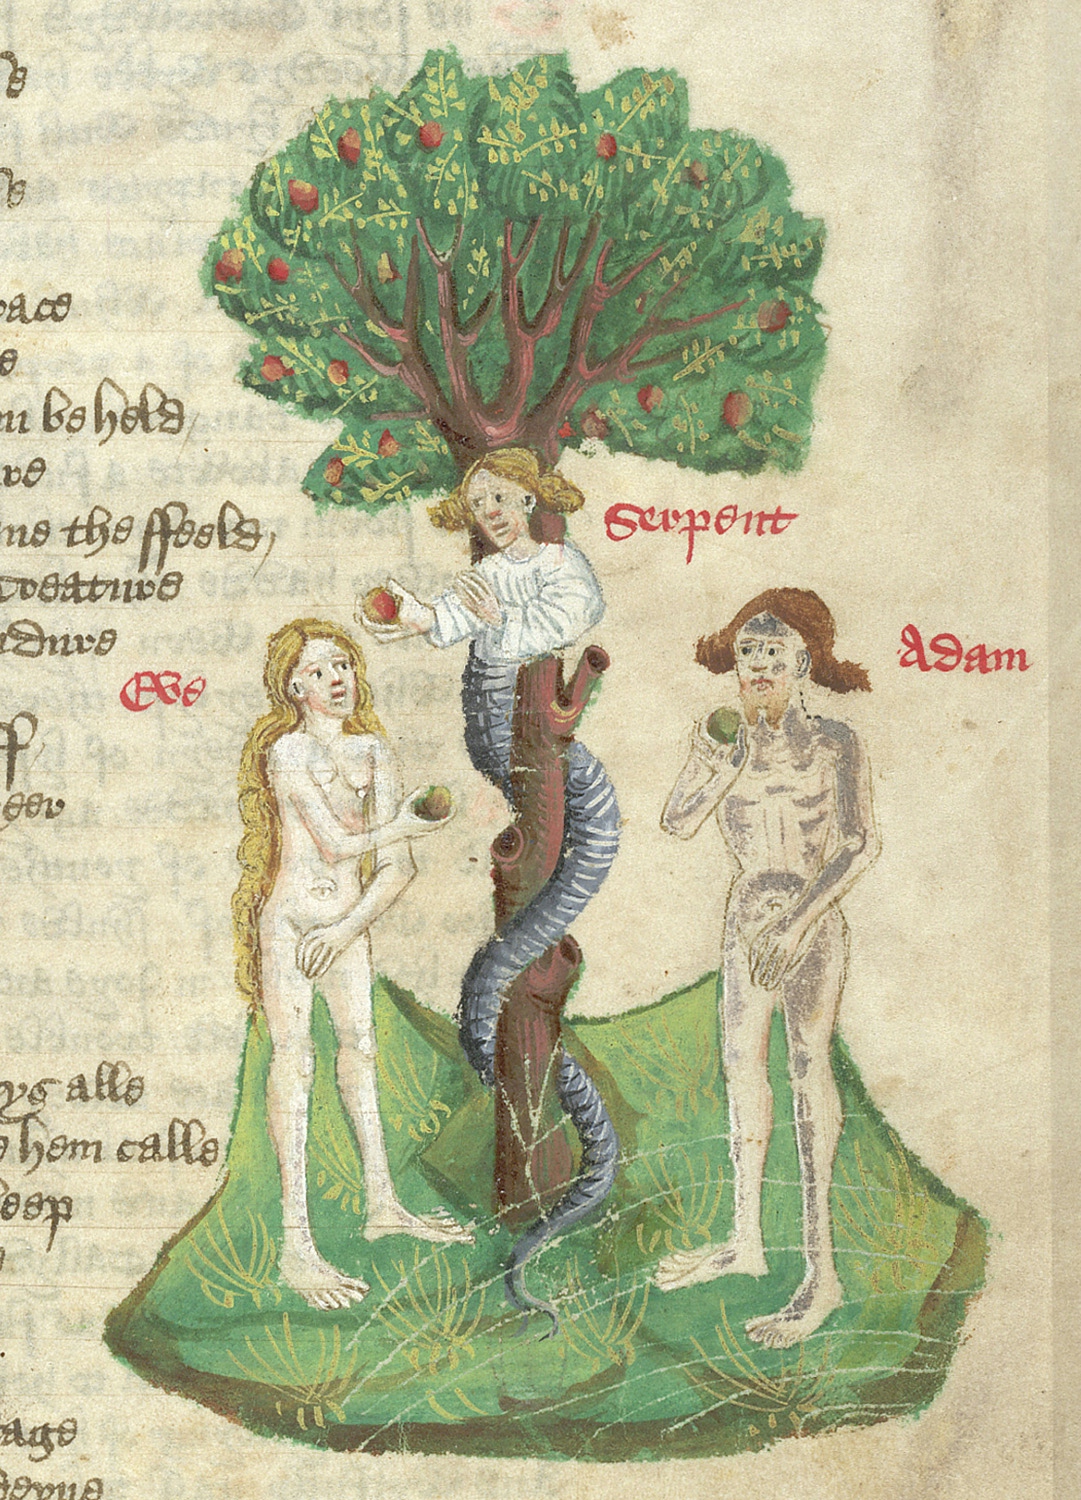 Colour image of a medieval manuscript showing an illustration of a naked Adam and Eve standing beside the apple tree, where a serpent with a human torso, face and arms is holding out a red apple to Eve. 